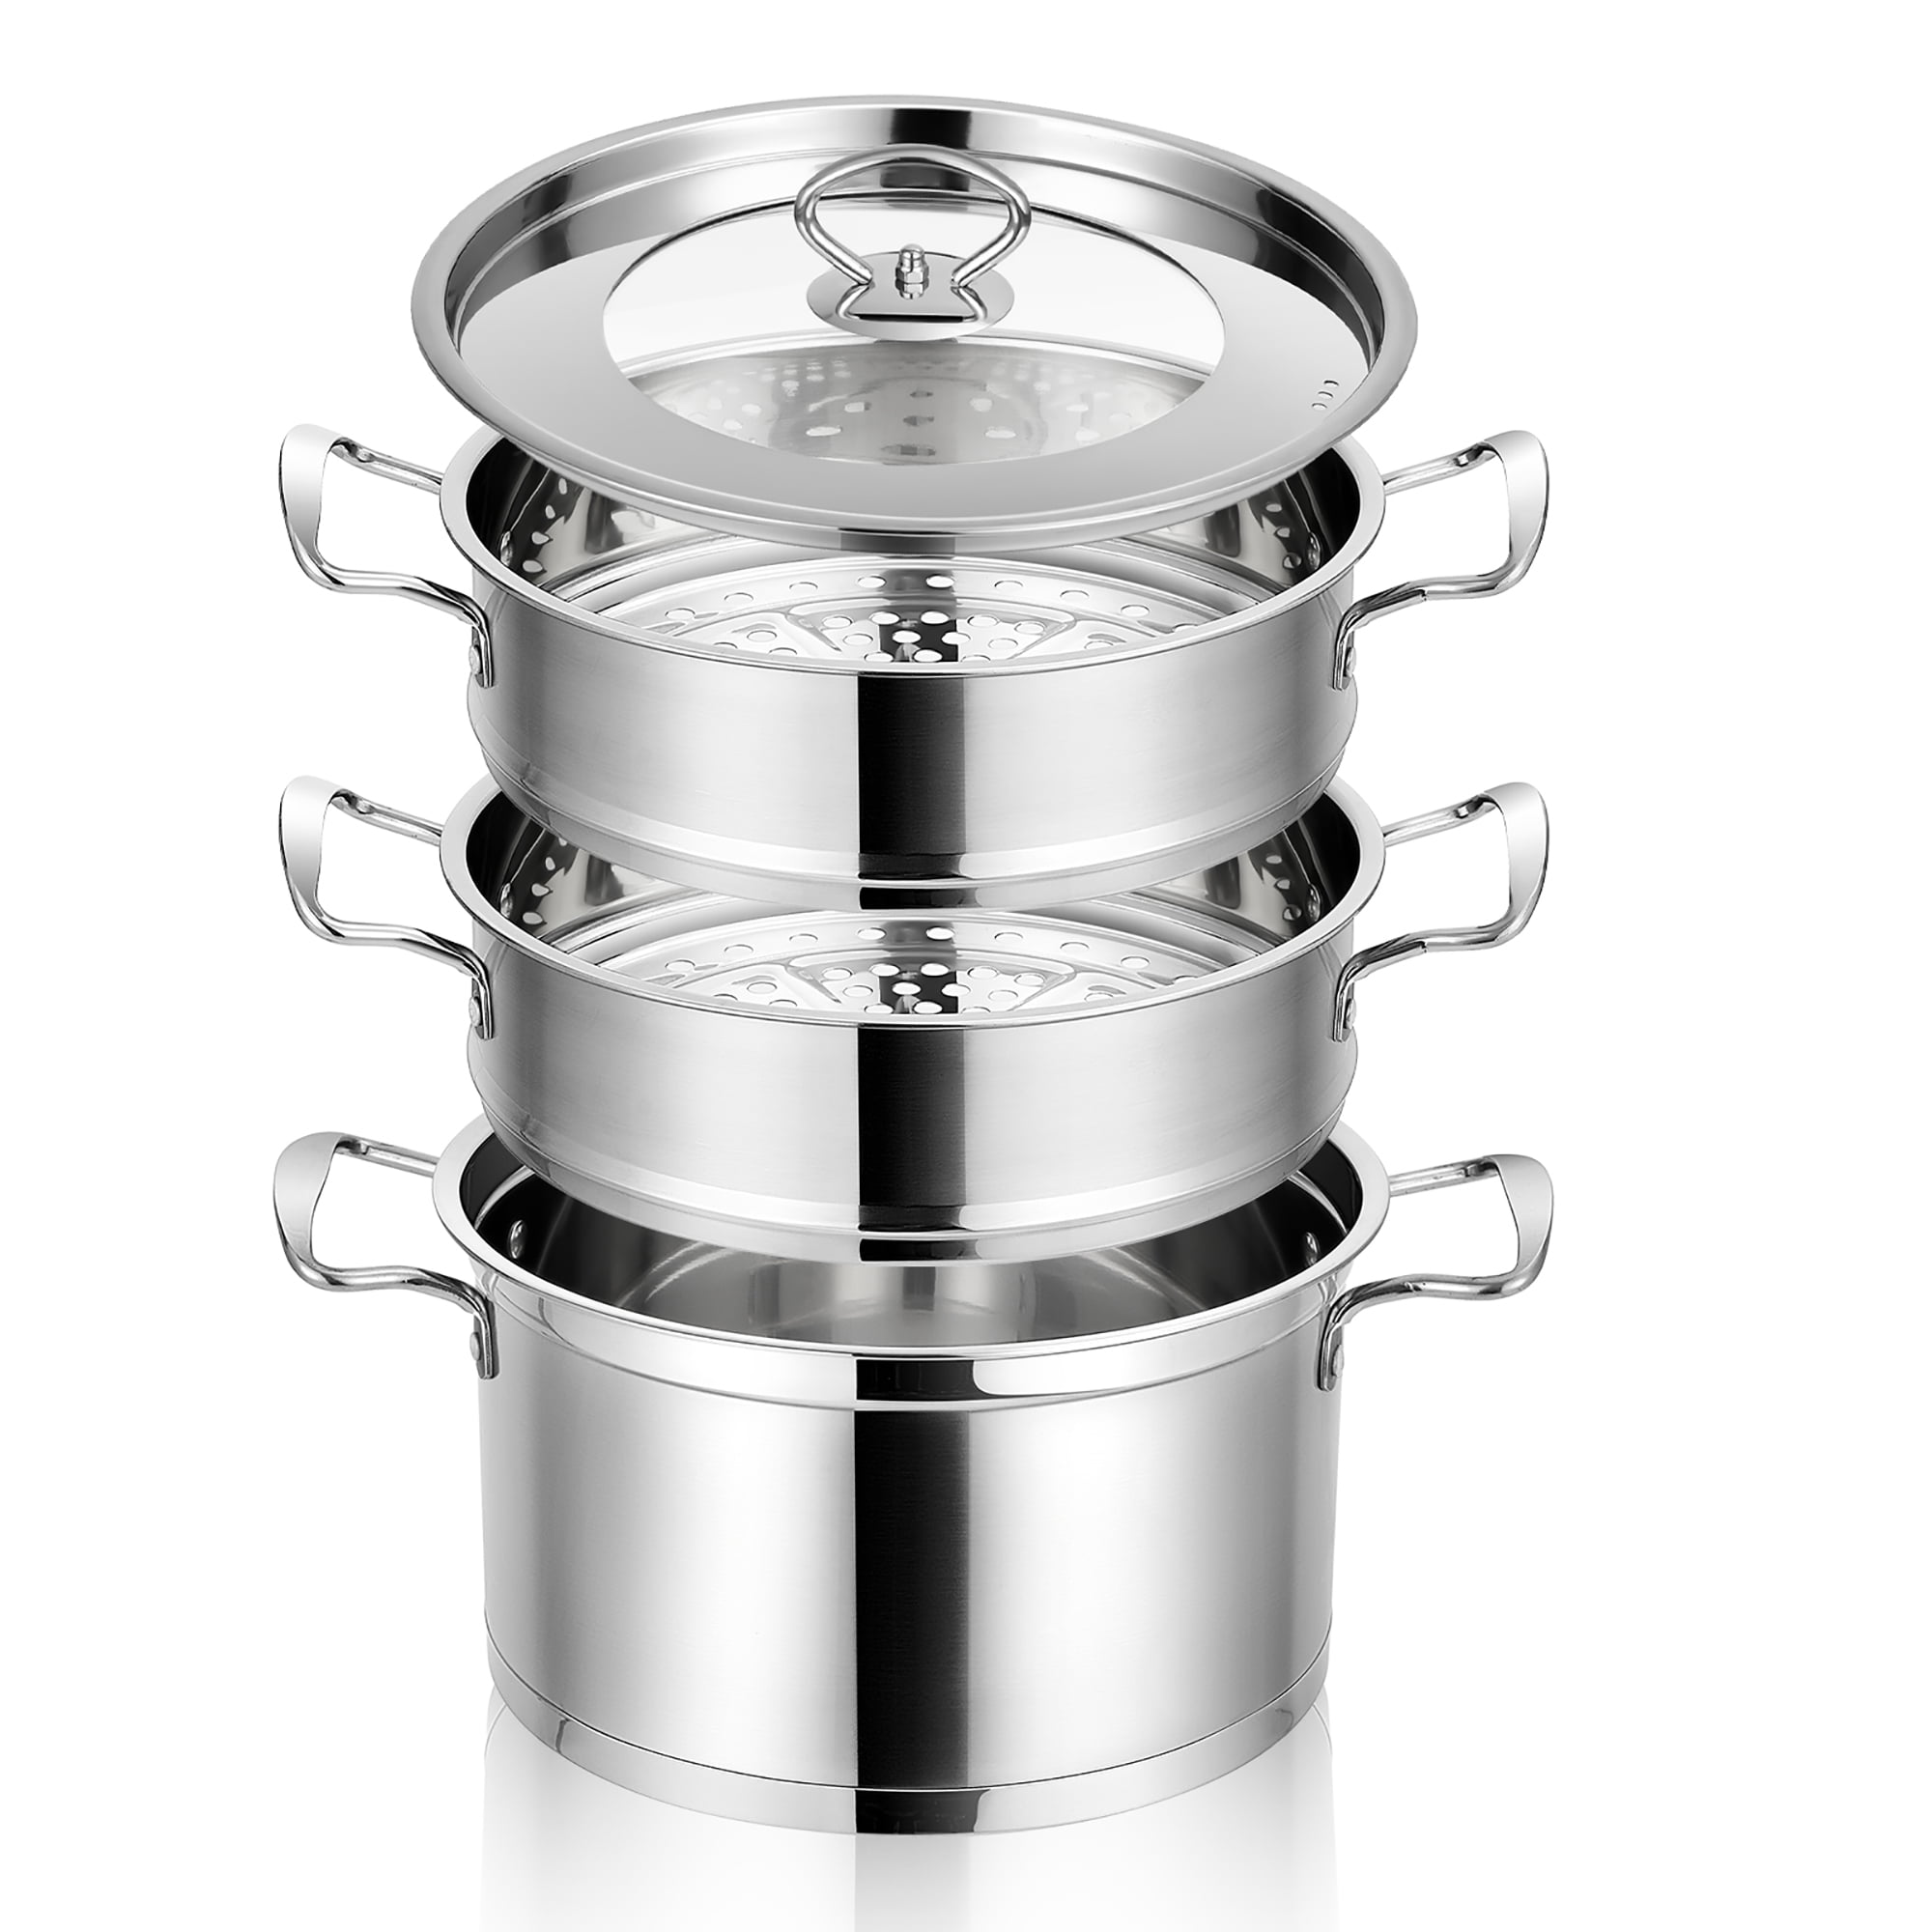  PETSITE 3-Tier Stainless Steel Steamer Pot, 11 Multi-Layer  Cooking Pot, Steam Pot with Handles & Tempered Glass Lid, Steamer for  Cooking: Home & Kitchen